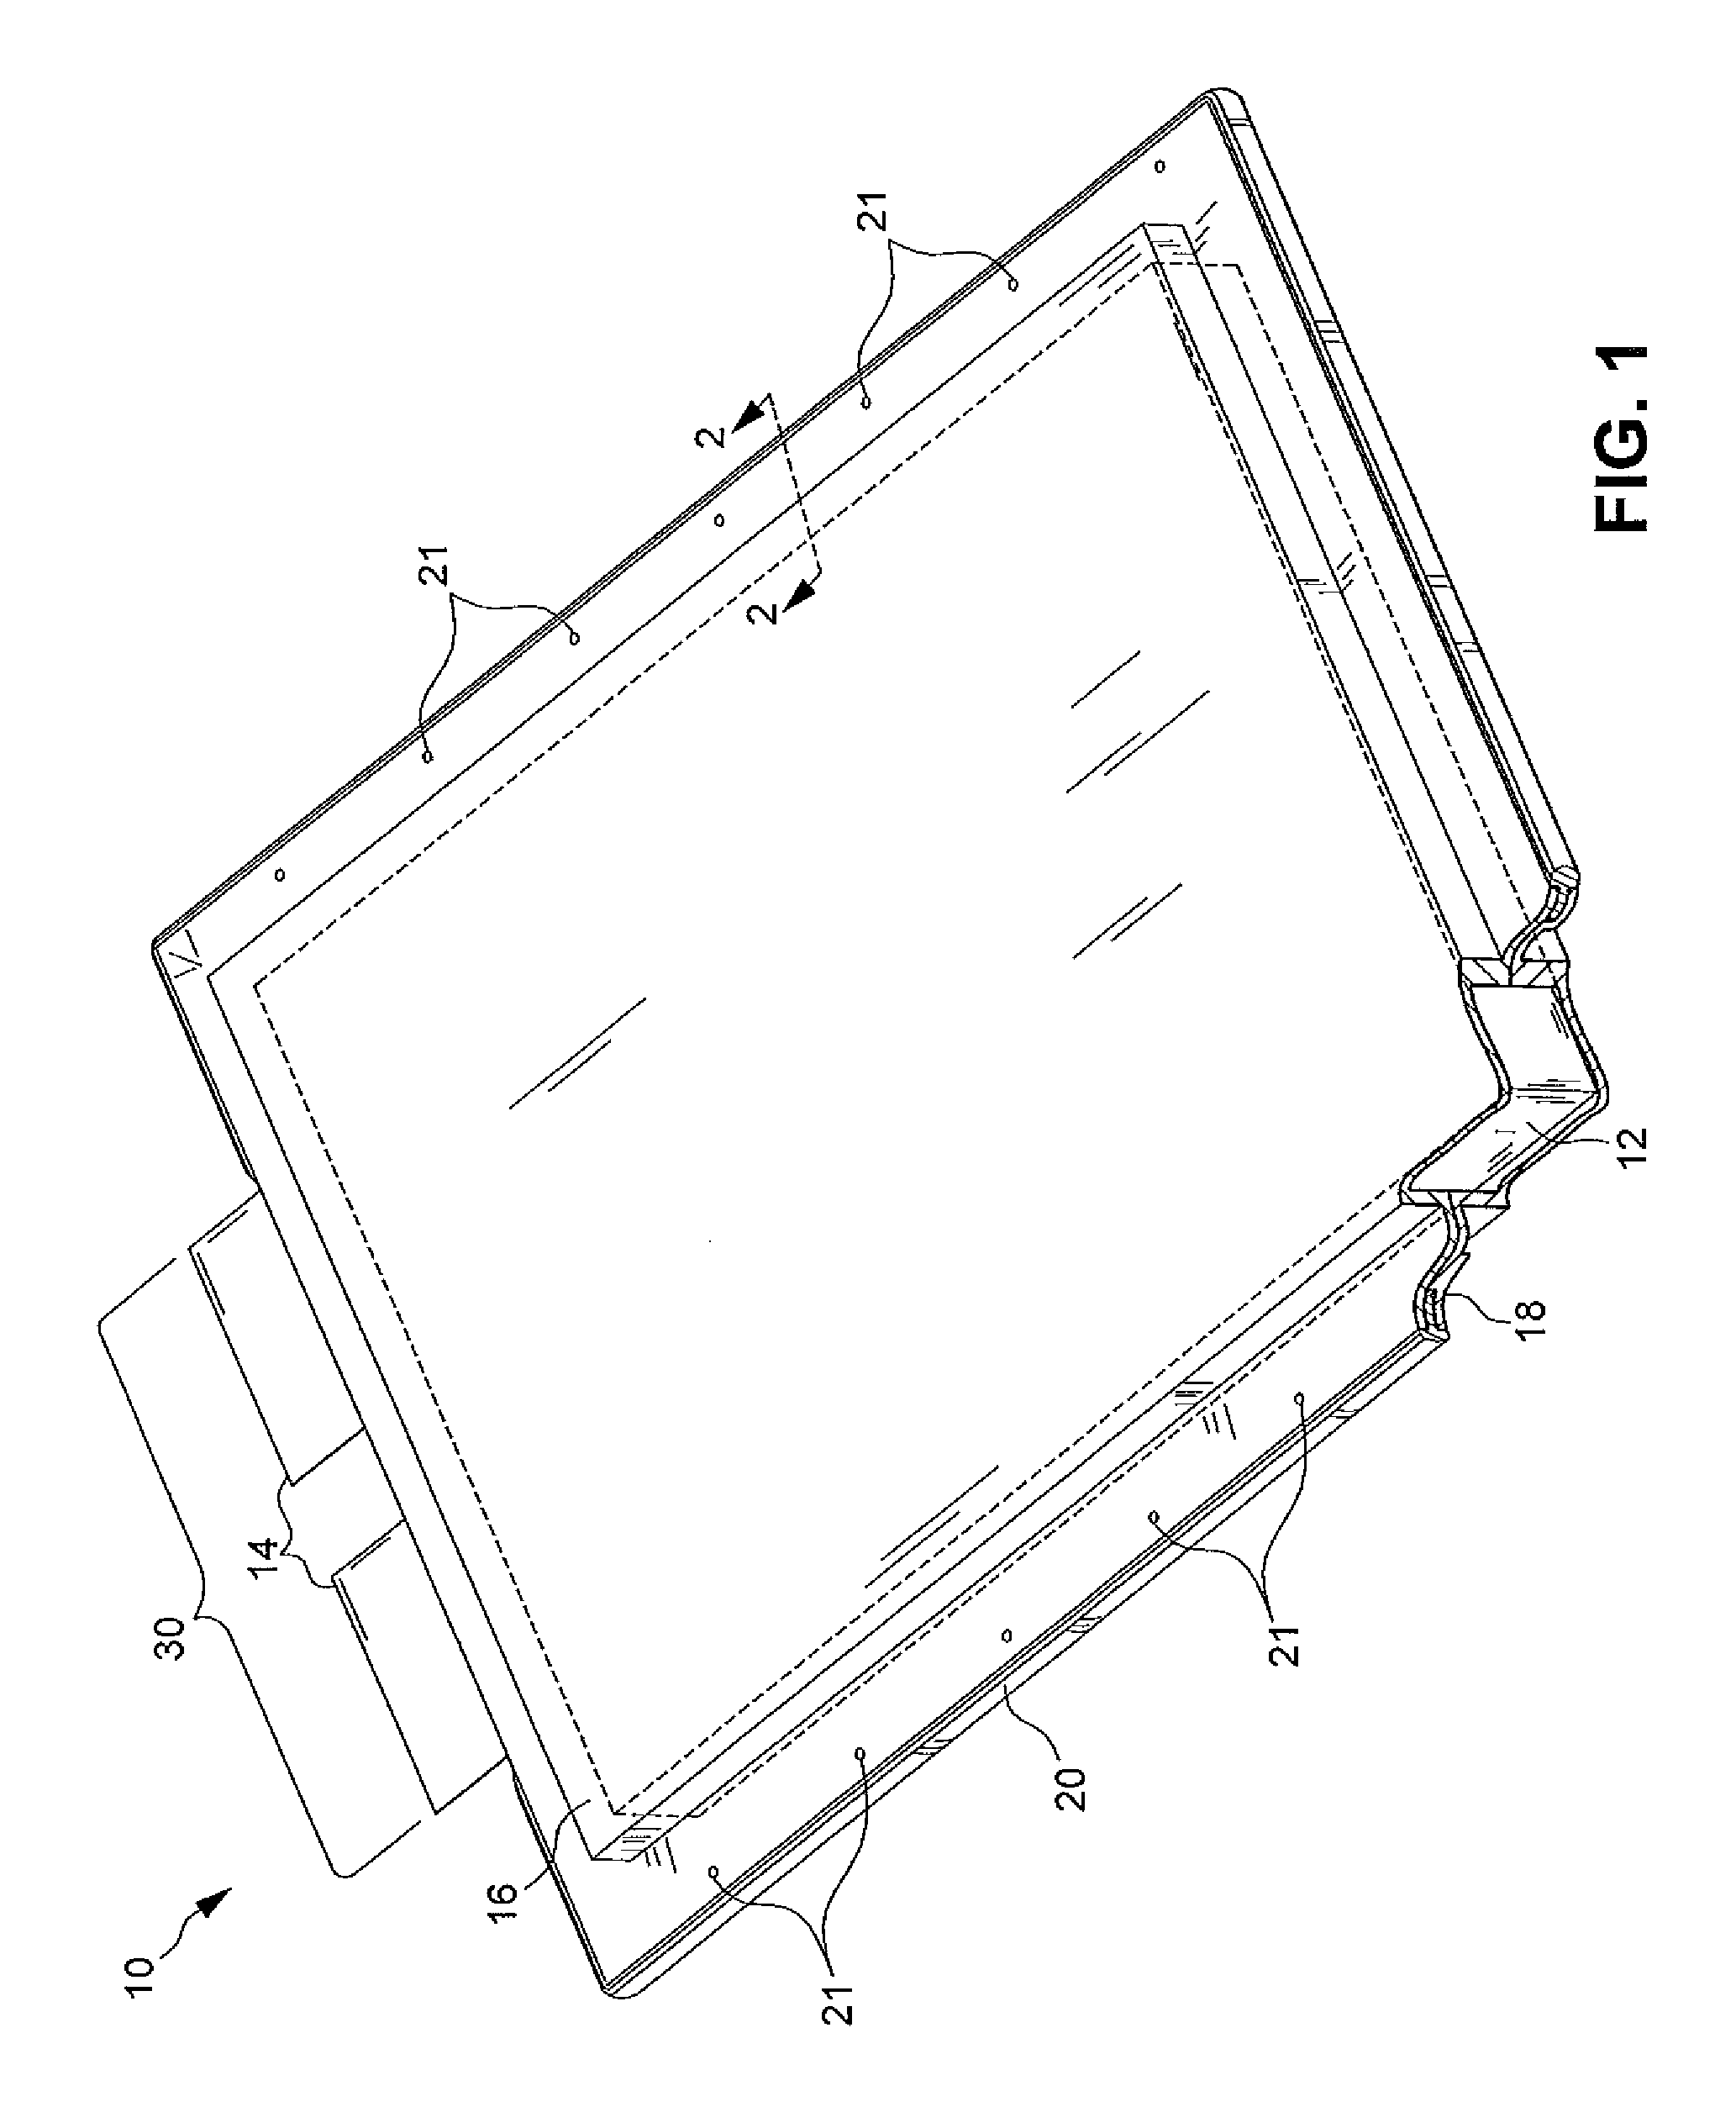 Extended range electric vehicle battery cell packaging for pouch design